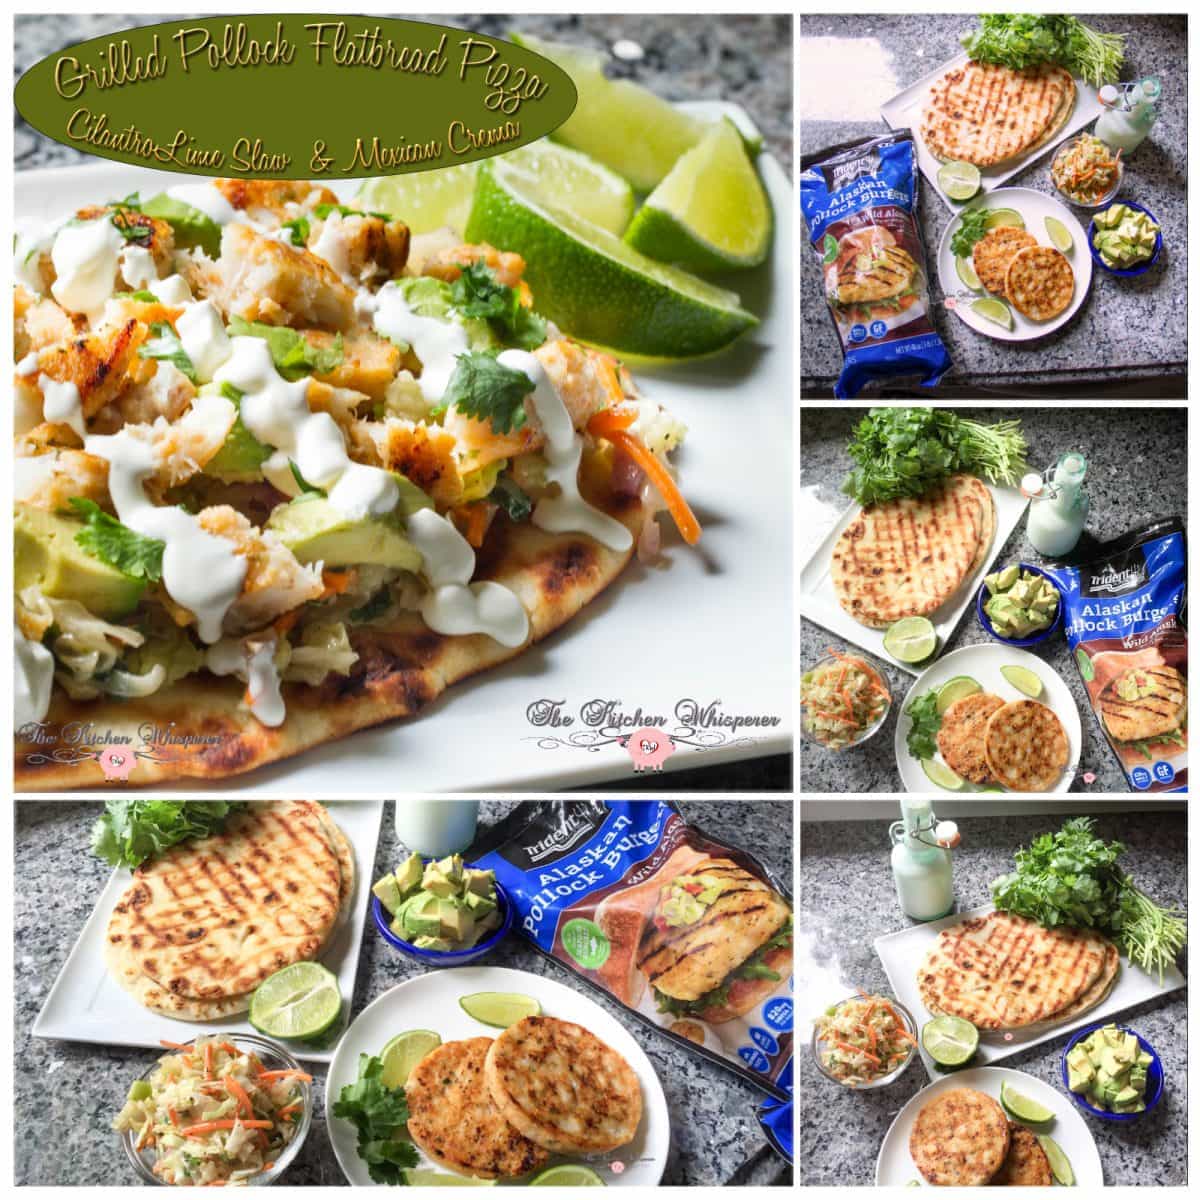 Grilled Pollack Flatbread Pizza Collage